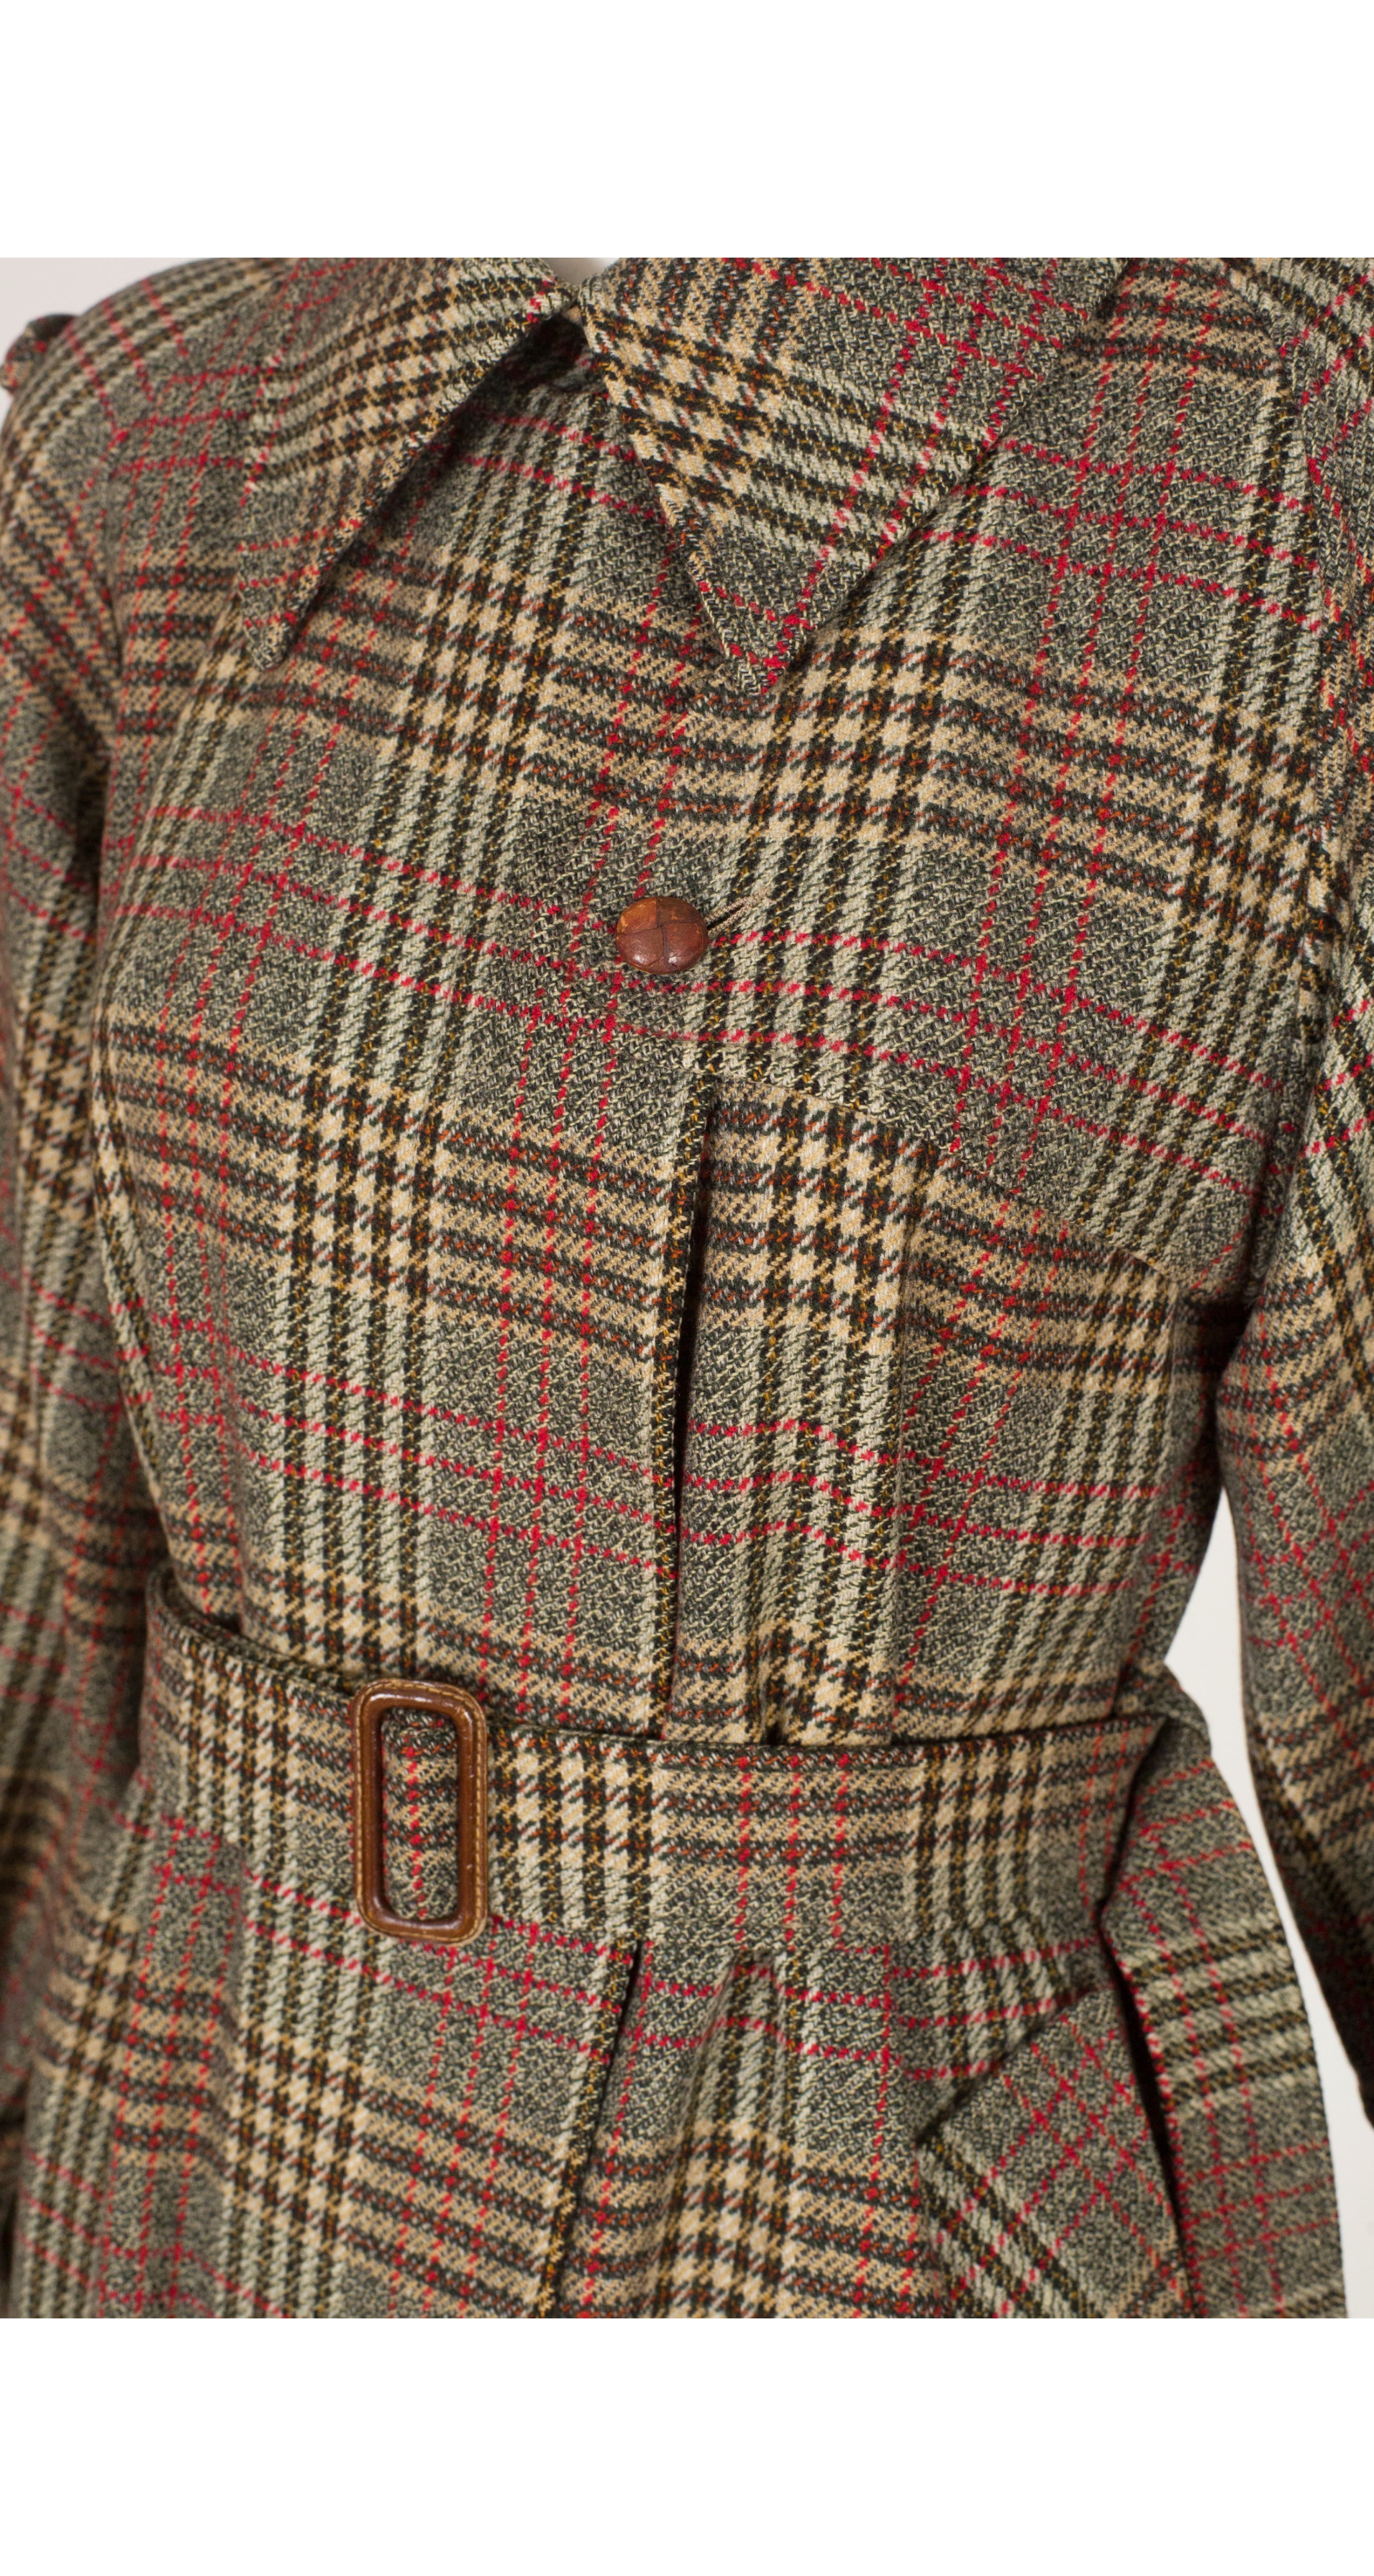 1970s Plaid Wool Rounded Shoulder Trench Coat